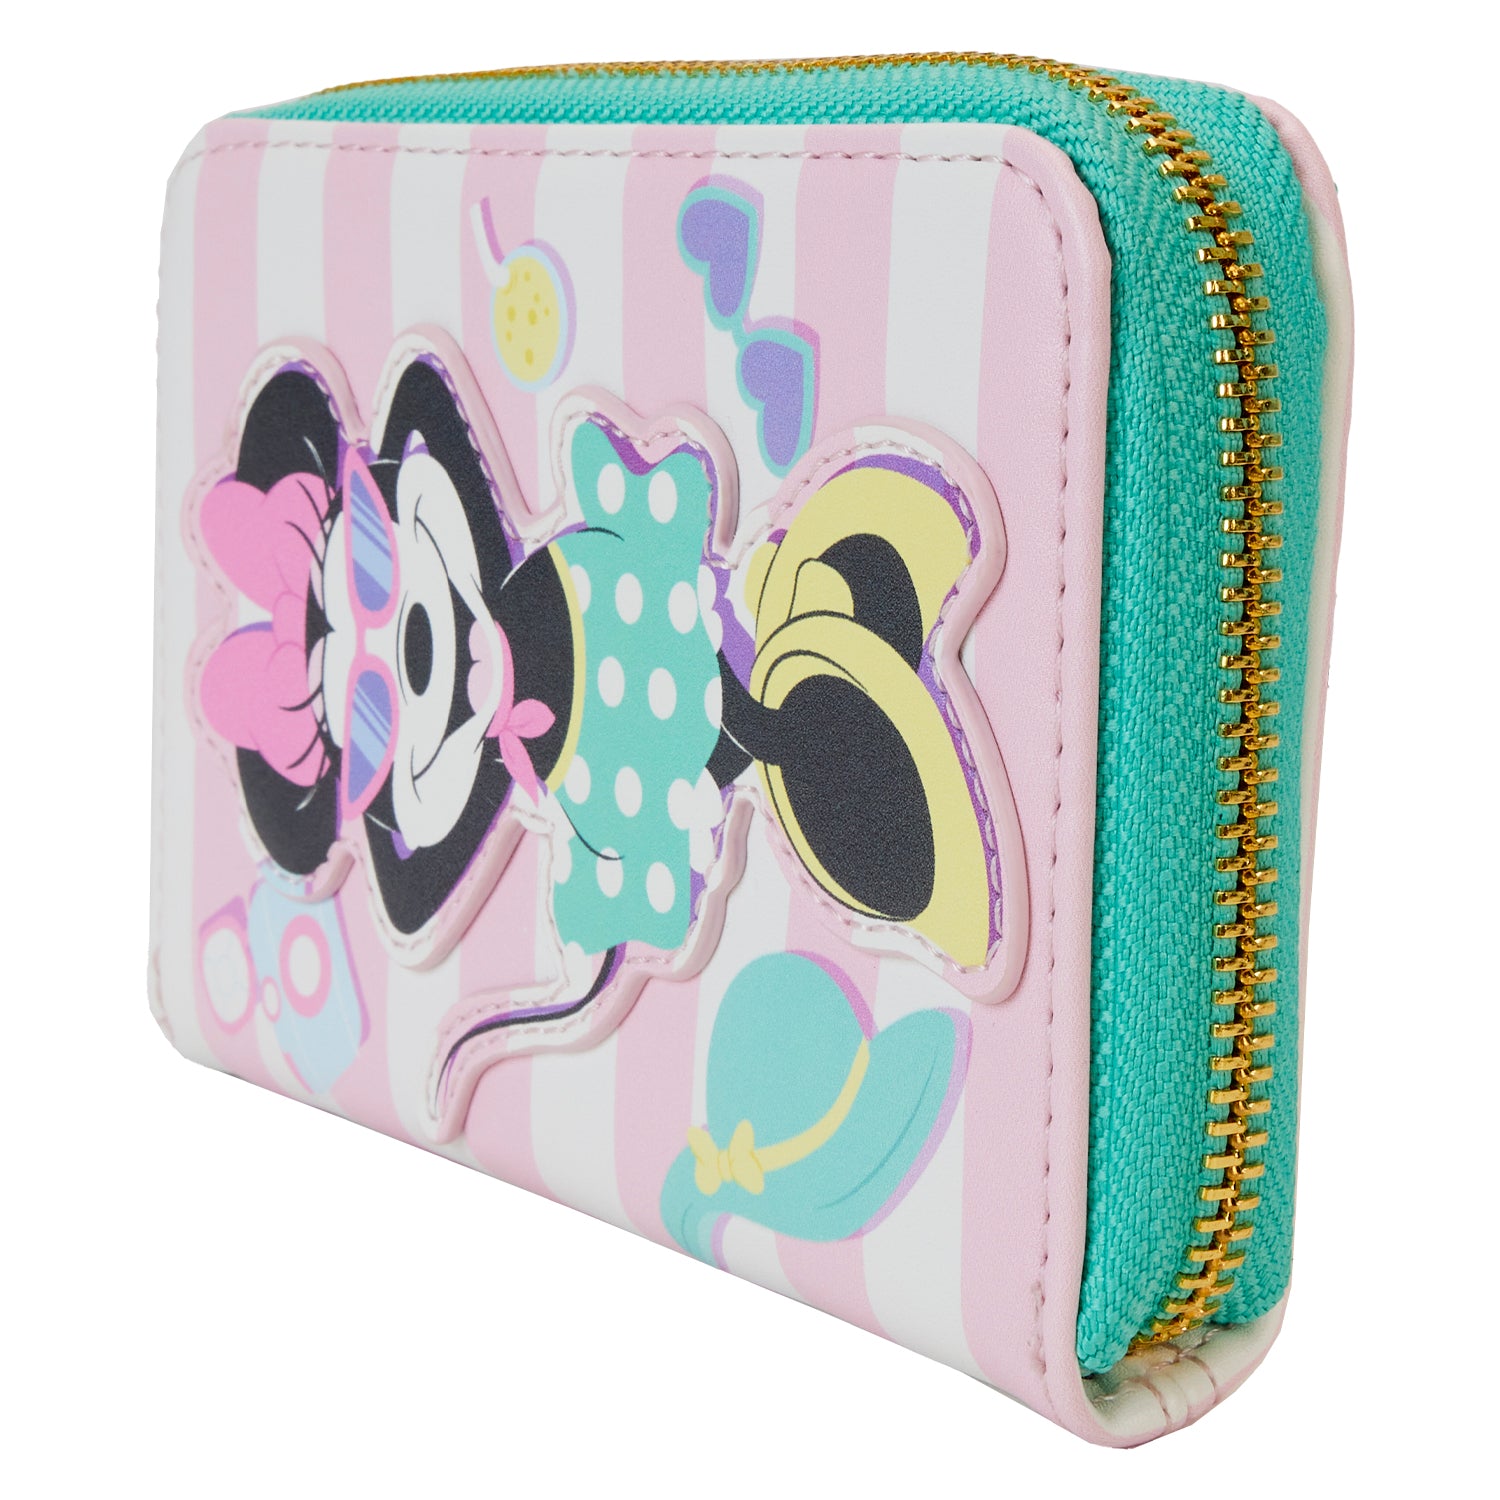 Loungefly Disney Minnie Mouse Vacation Style Zip Around Wallet